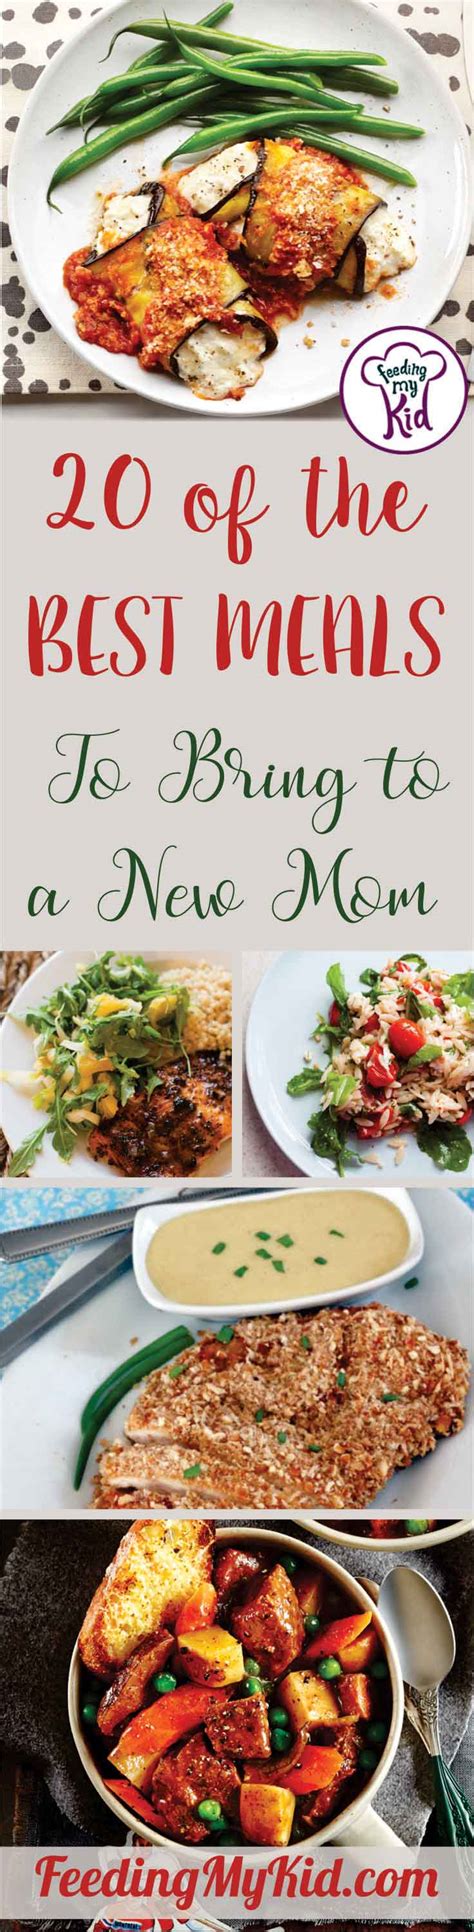 Meals For New Moms Of The Best Meals To Bring To A New Mom Meals Take A Meal Meal Train